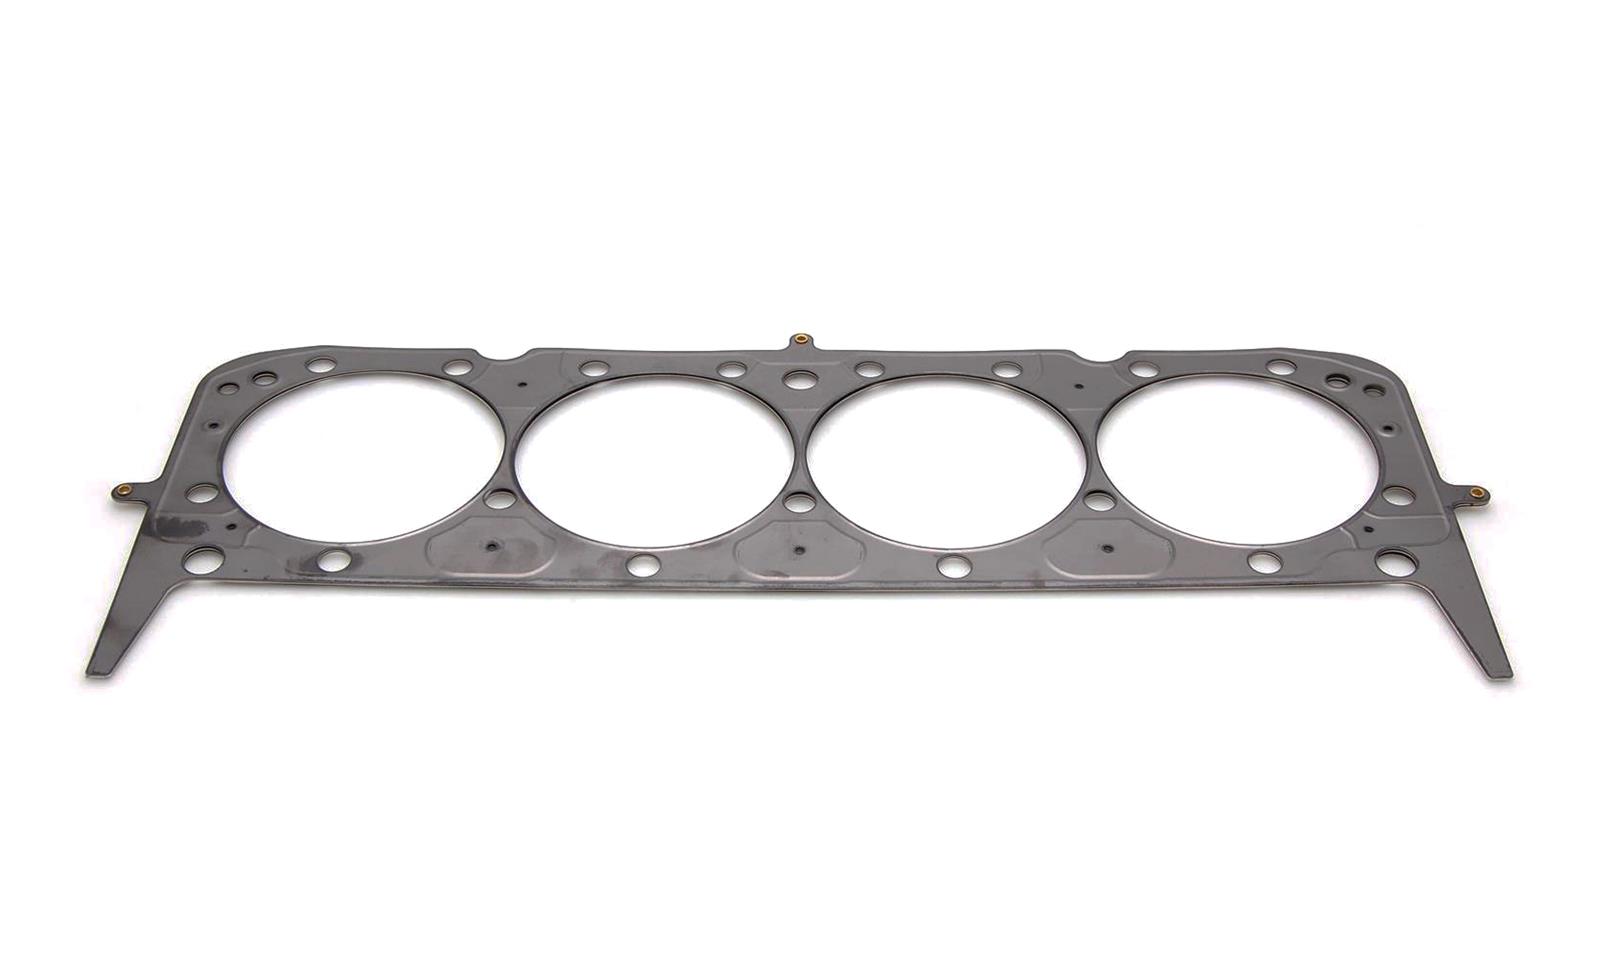 Cometic Gasket C5400-040 MLS .040 Thickness 4.125 Head Gasket for Small Block Chevy Brodix